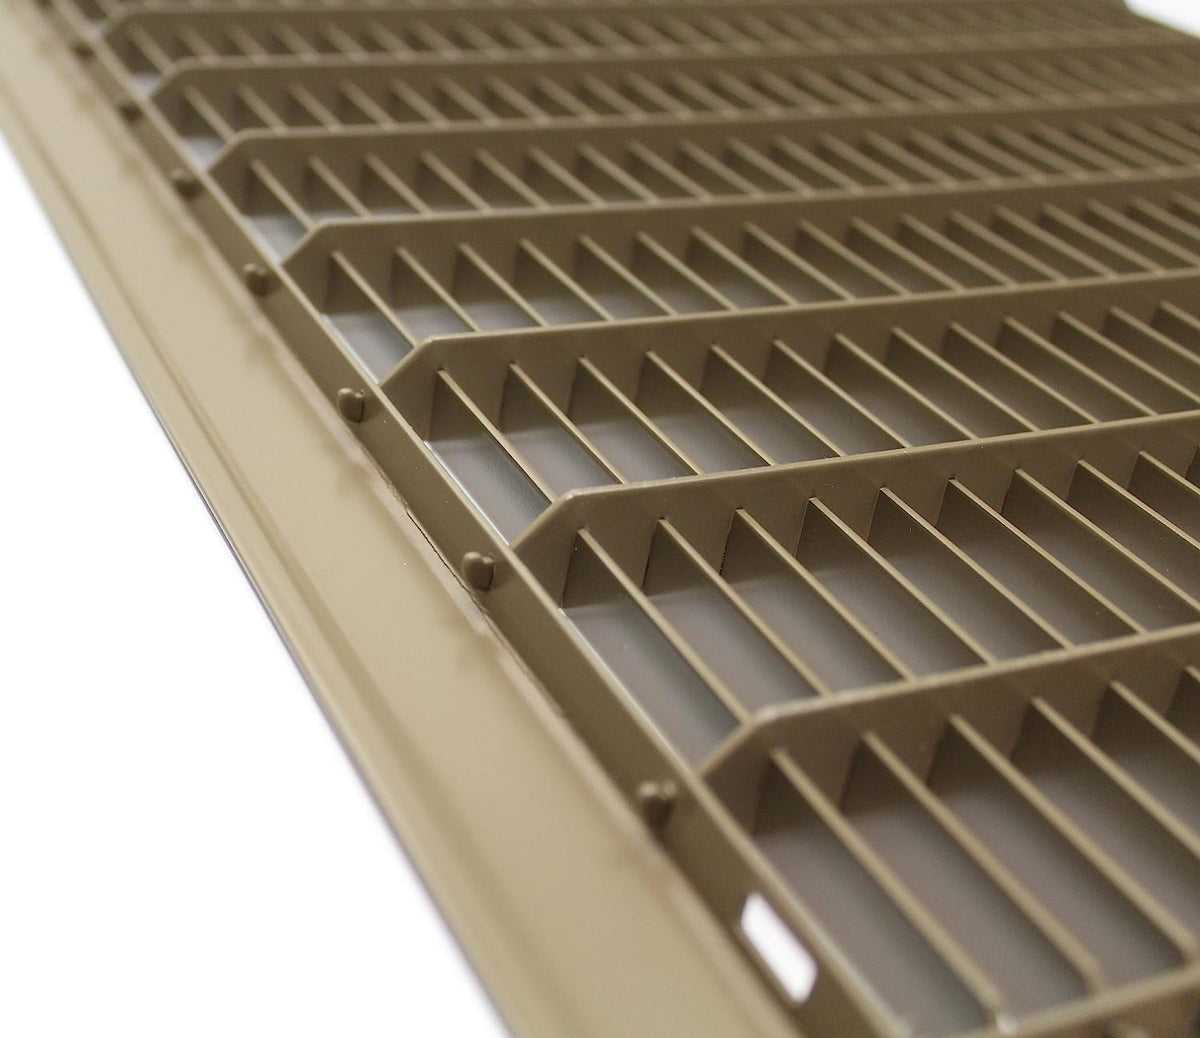 16&quot; X 16&quot; Heavy Duty Floor Grille - Fixed Blades Air Grille - Brown [Outer Dimensions: 17.75 X 17.75]